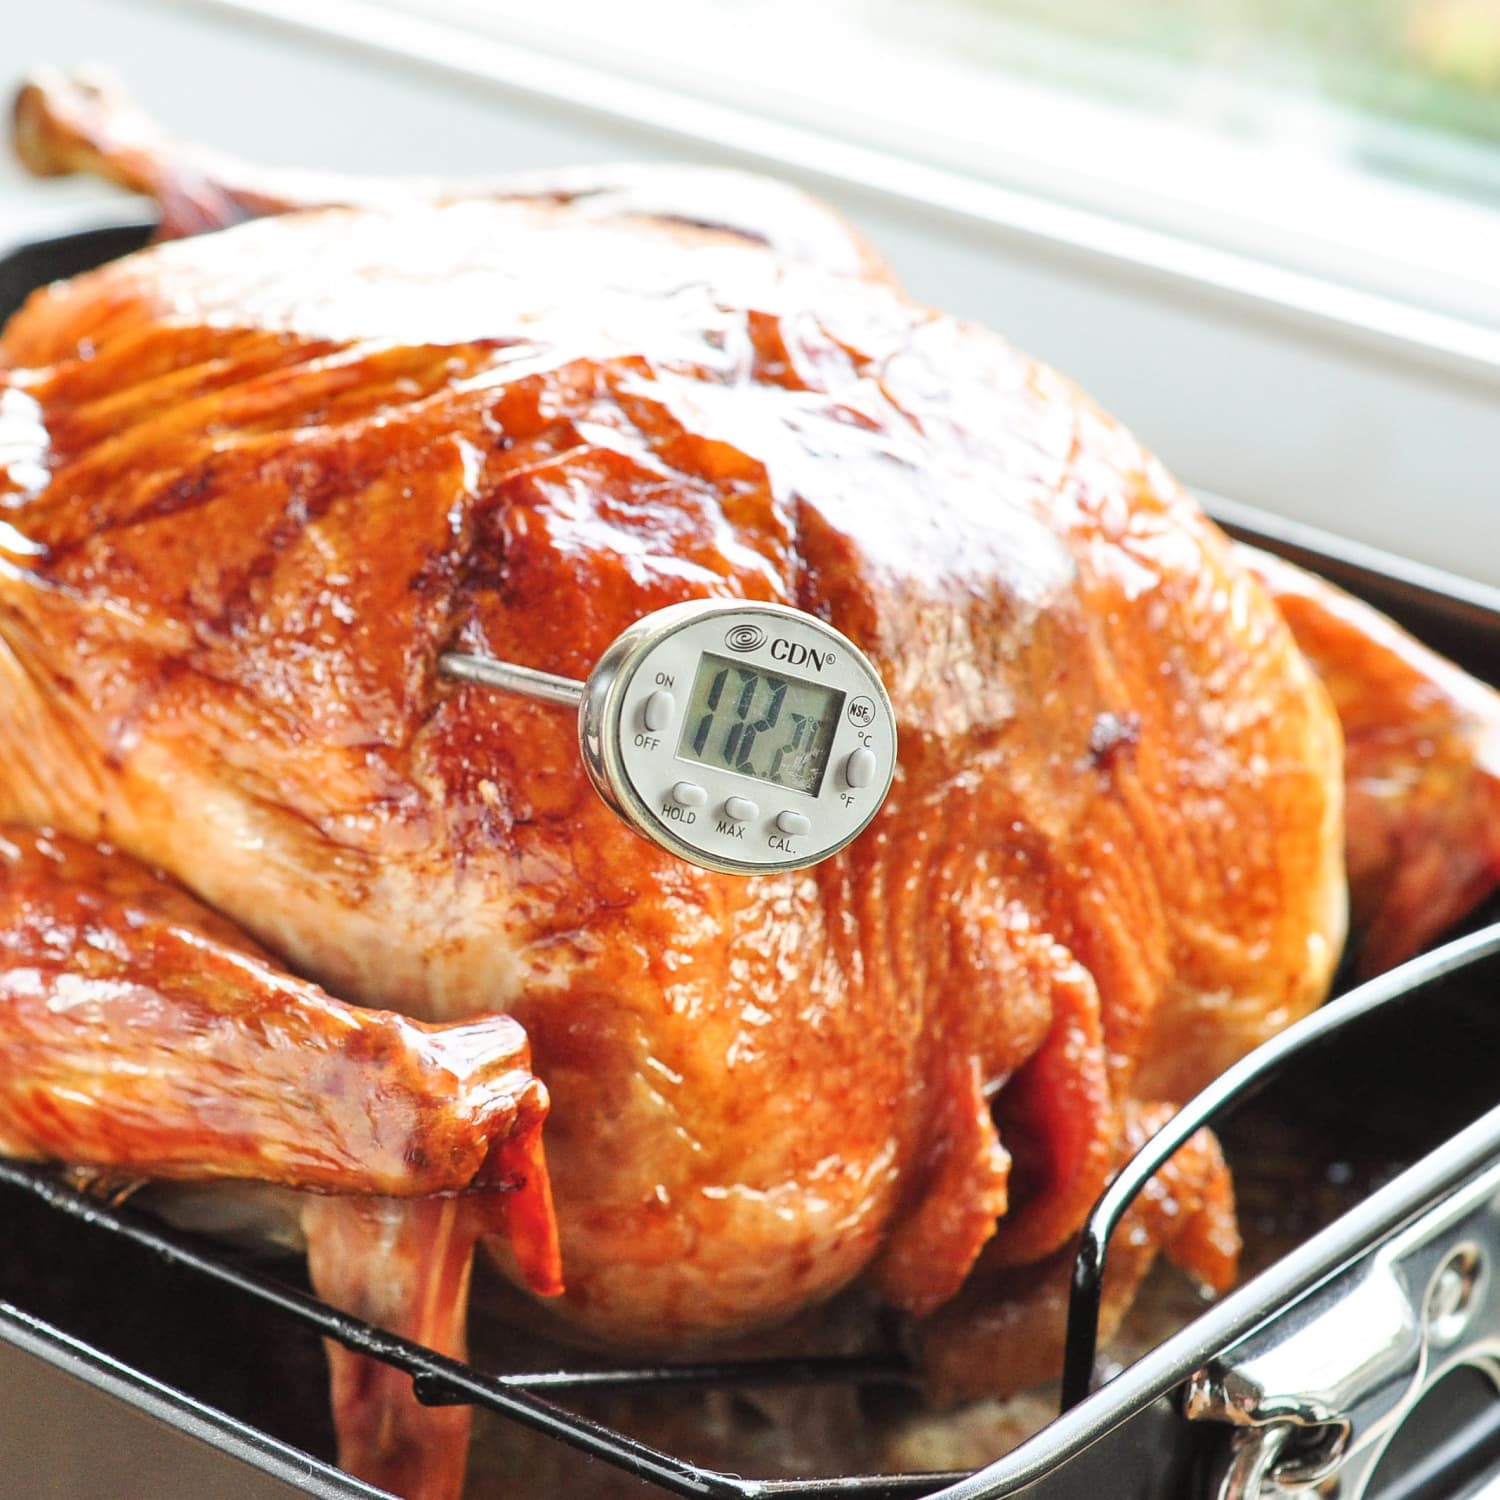 How to Tell if a Turkey Is Done Without a Thermometer